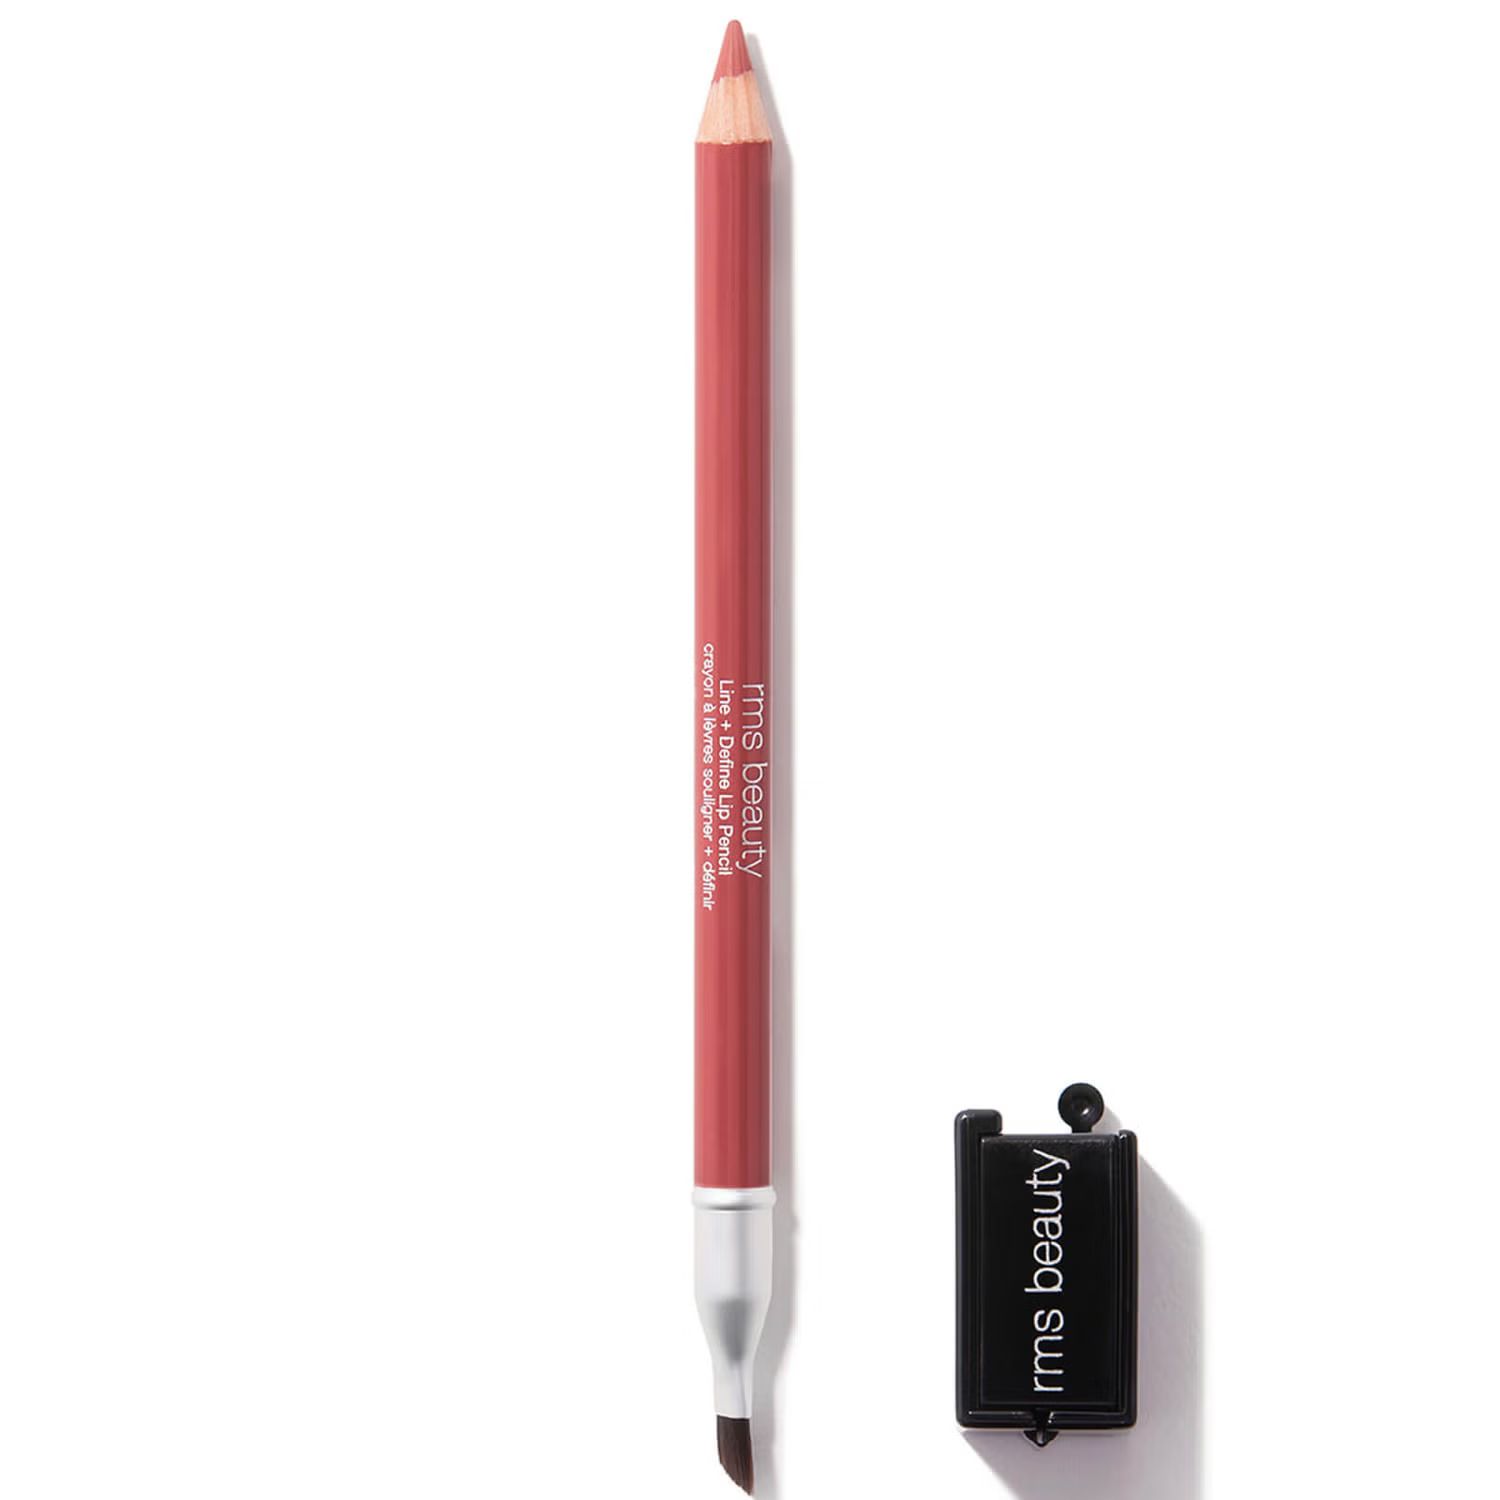 RMS Beauty Go Nude Lip Pencil 1.08g (Various Shades) | Dermstore (US)